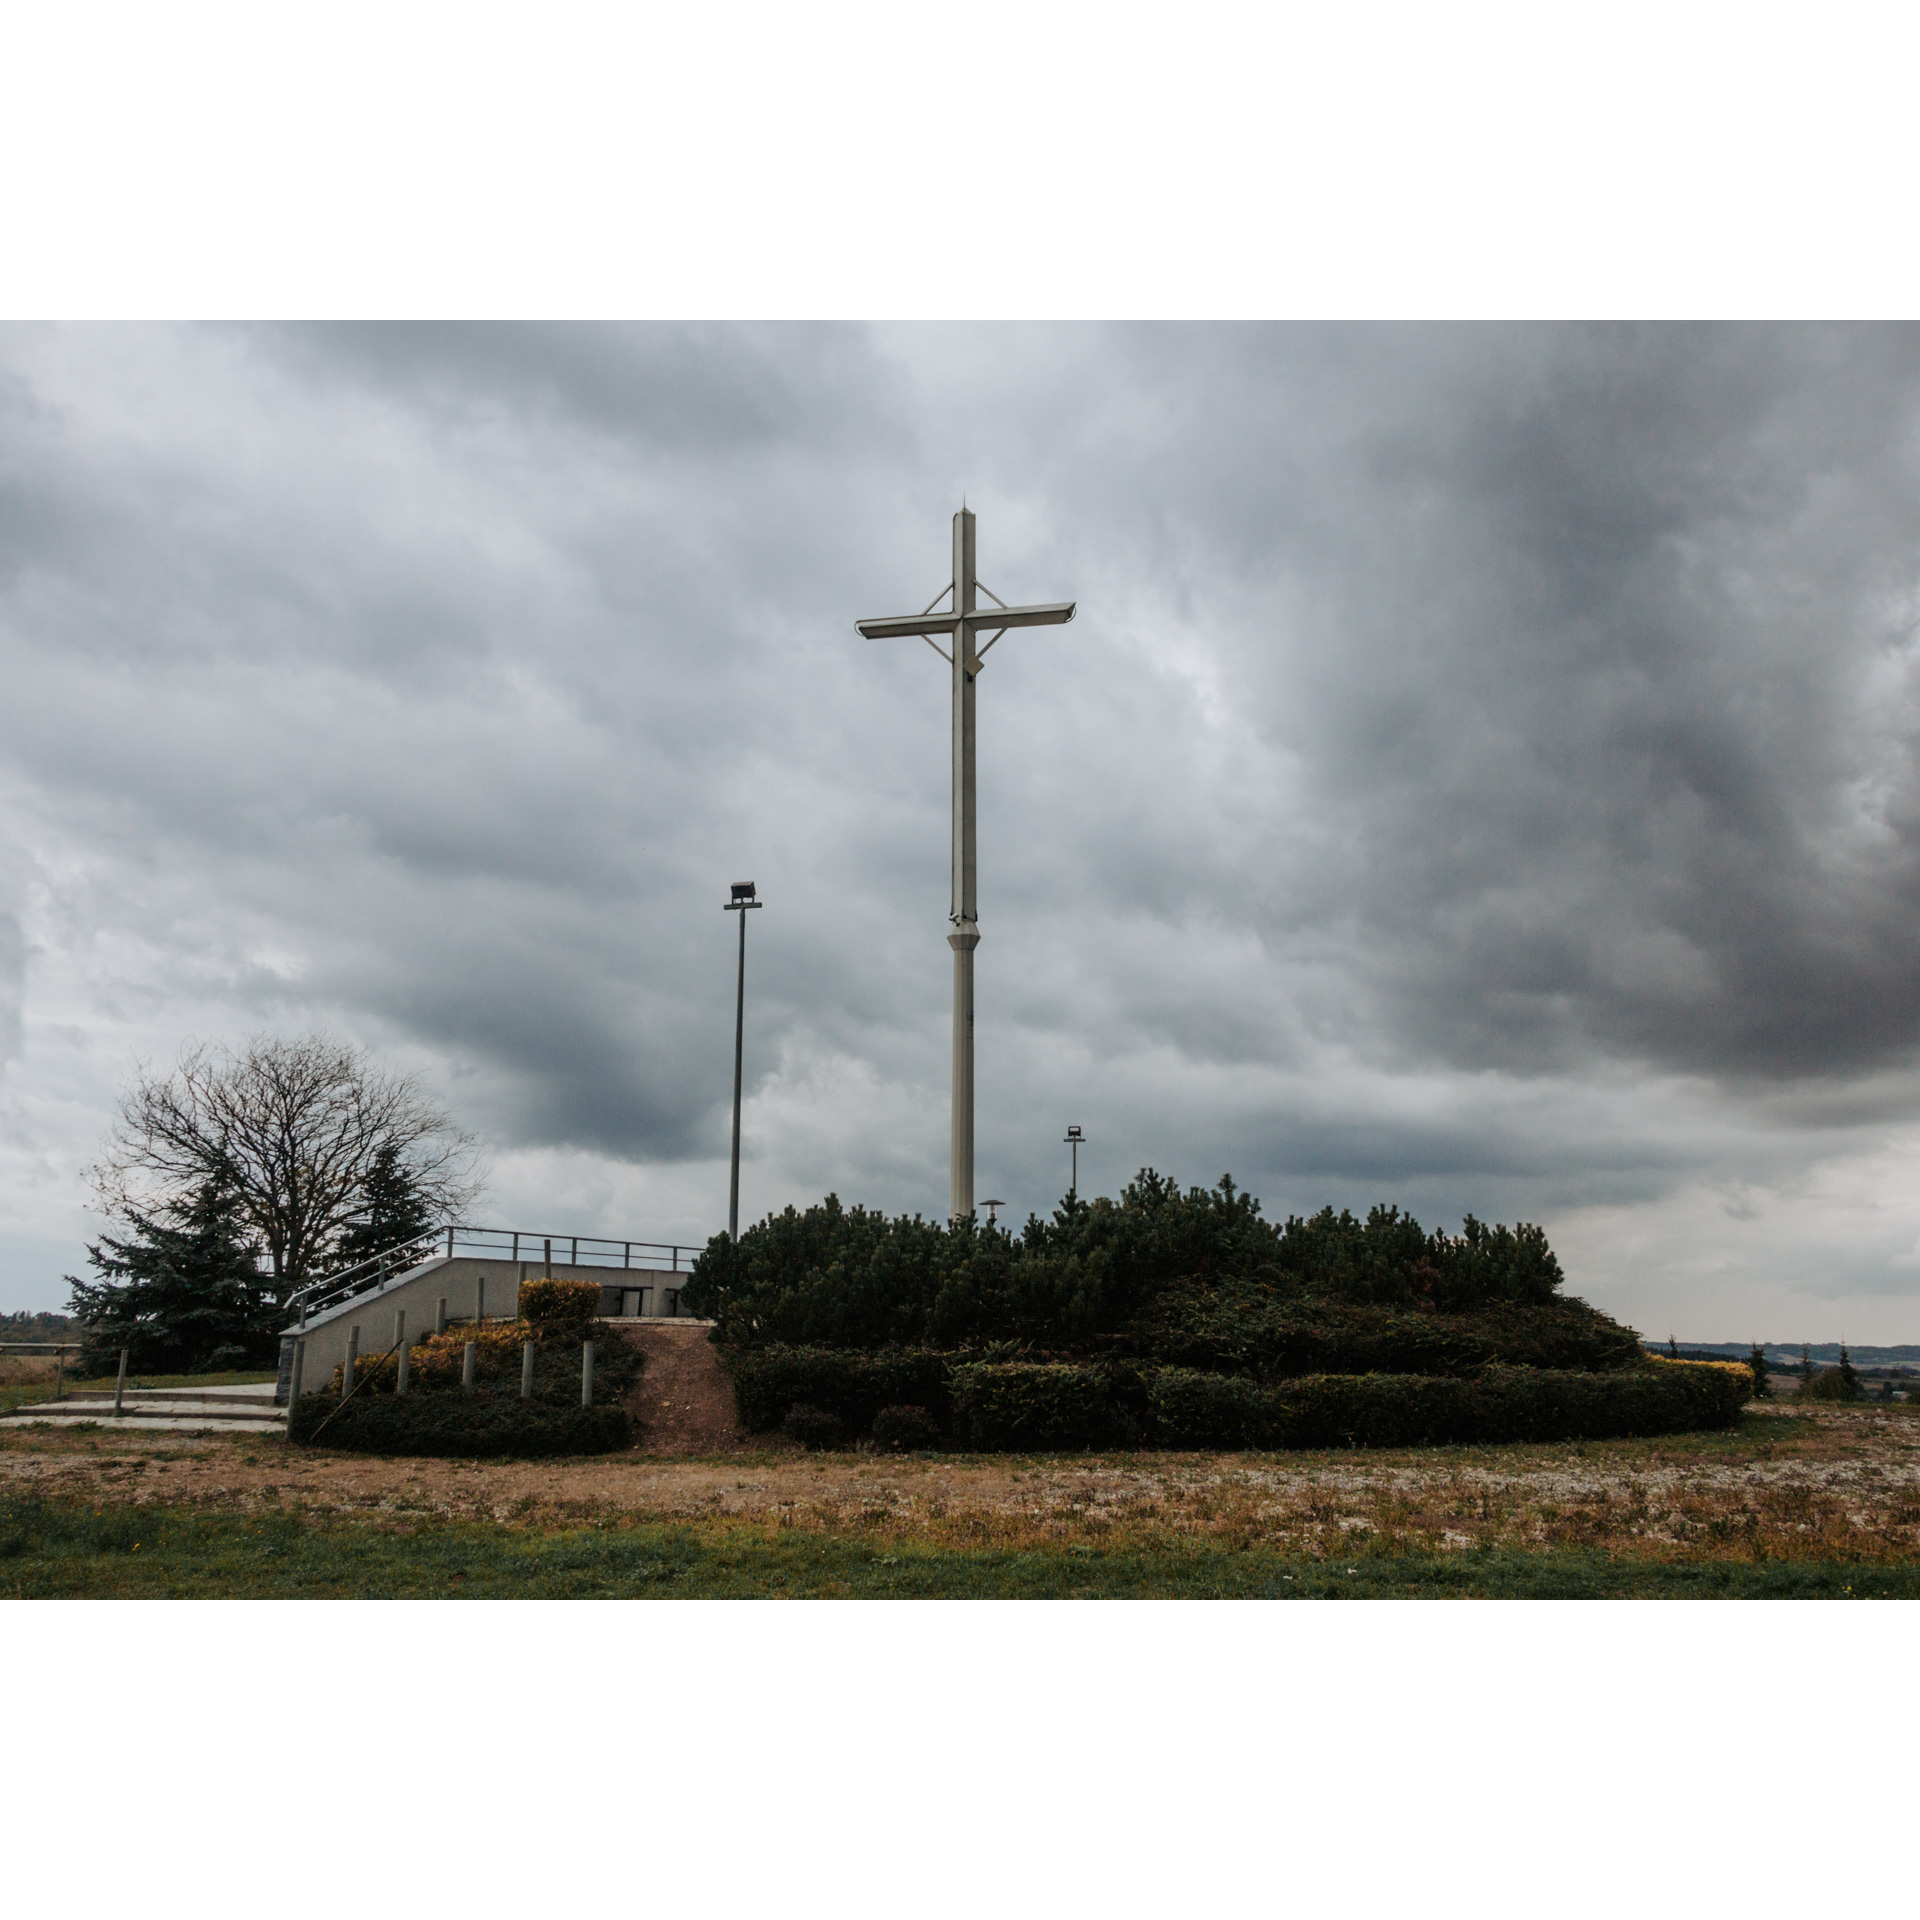 A tall cross surrounded by low bushes against a cloudy gray sky